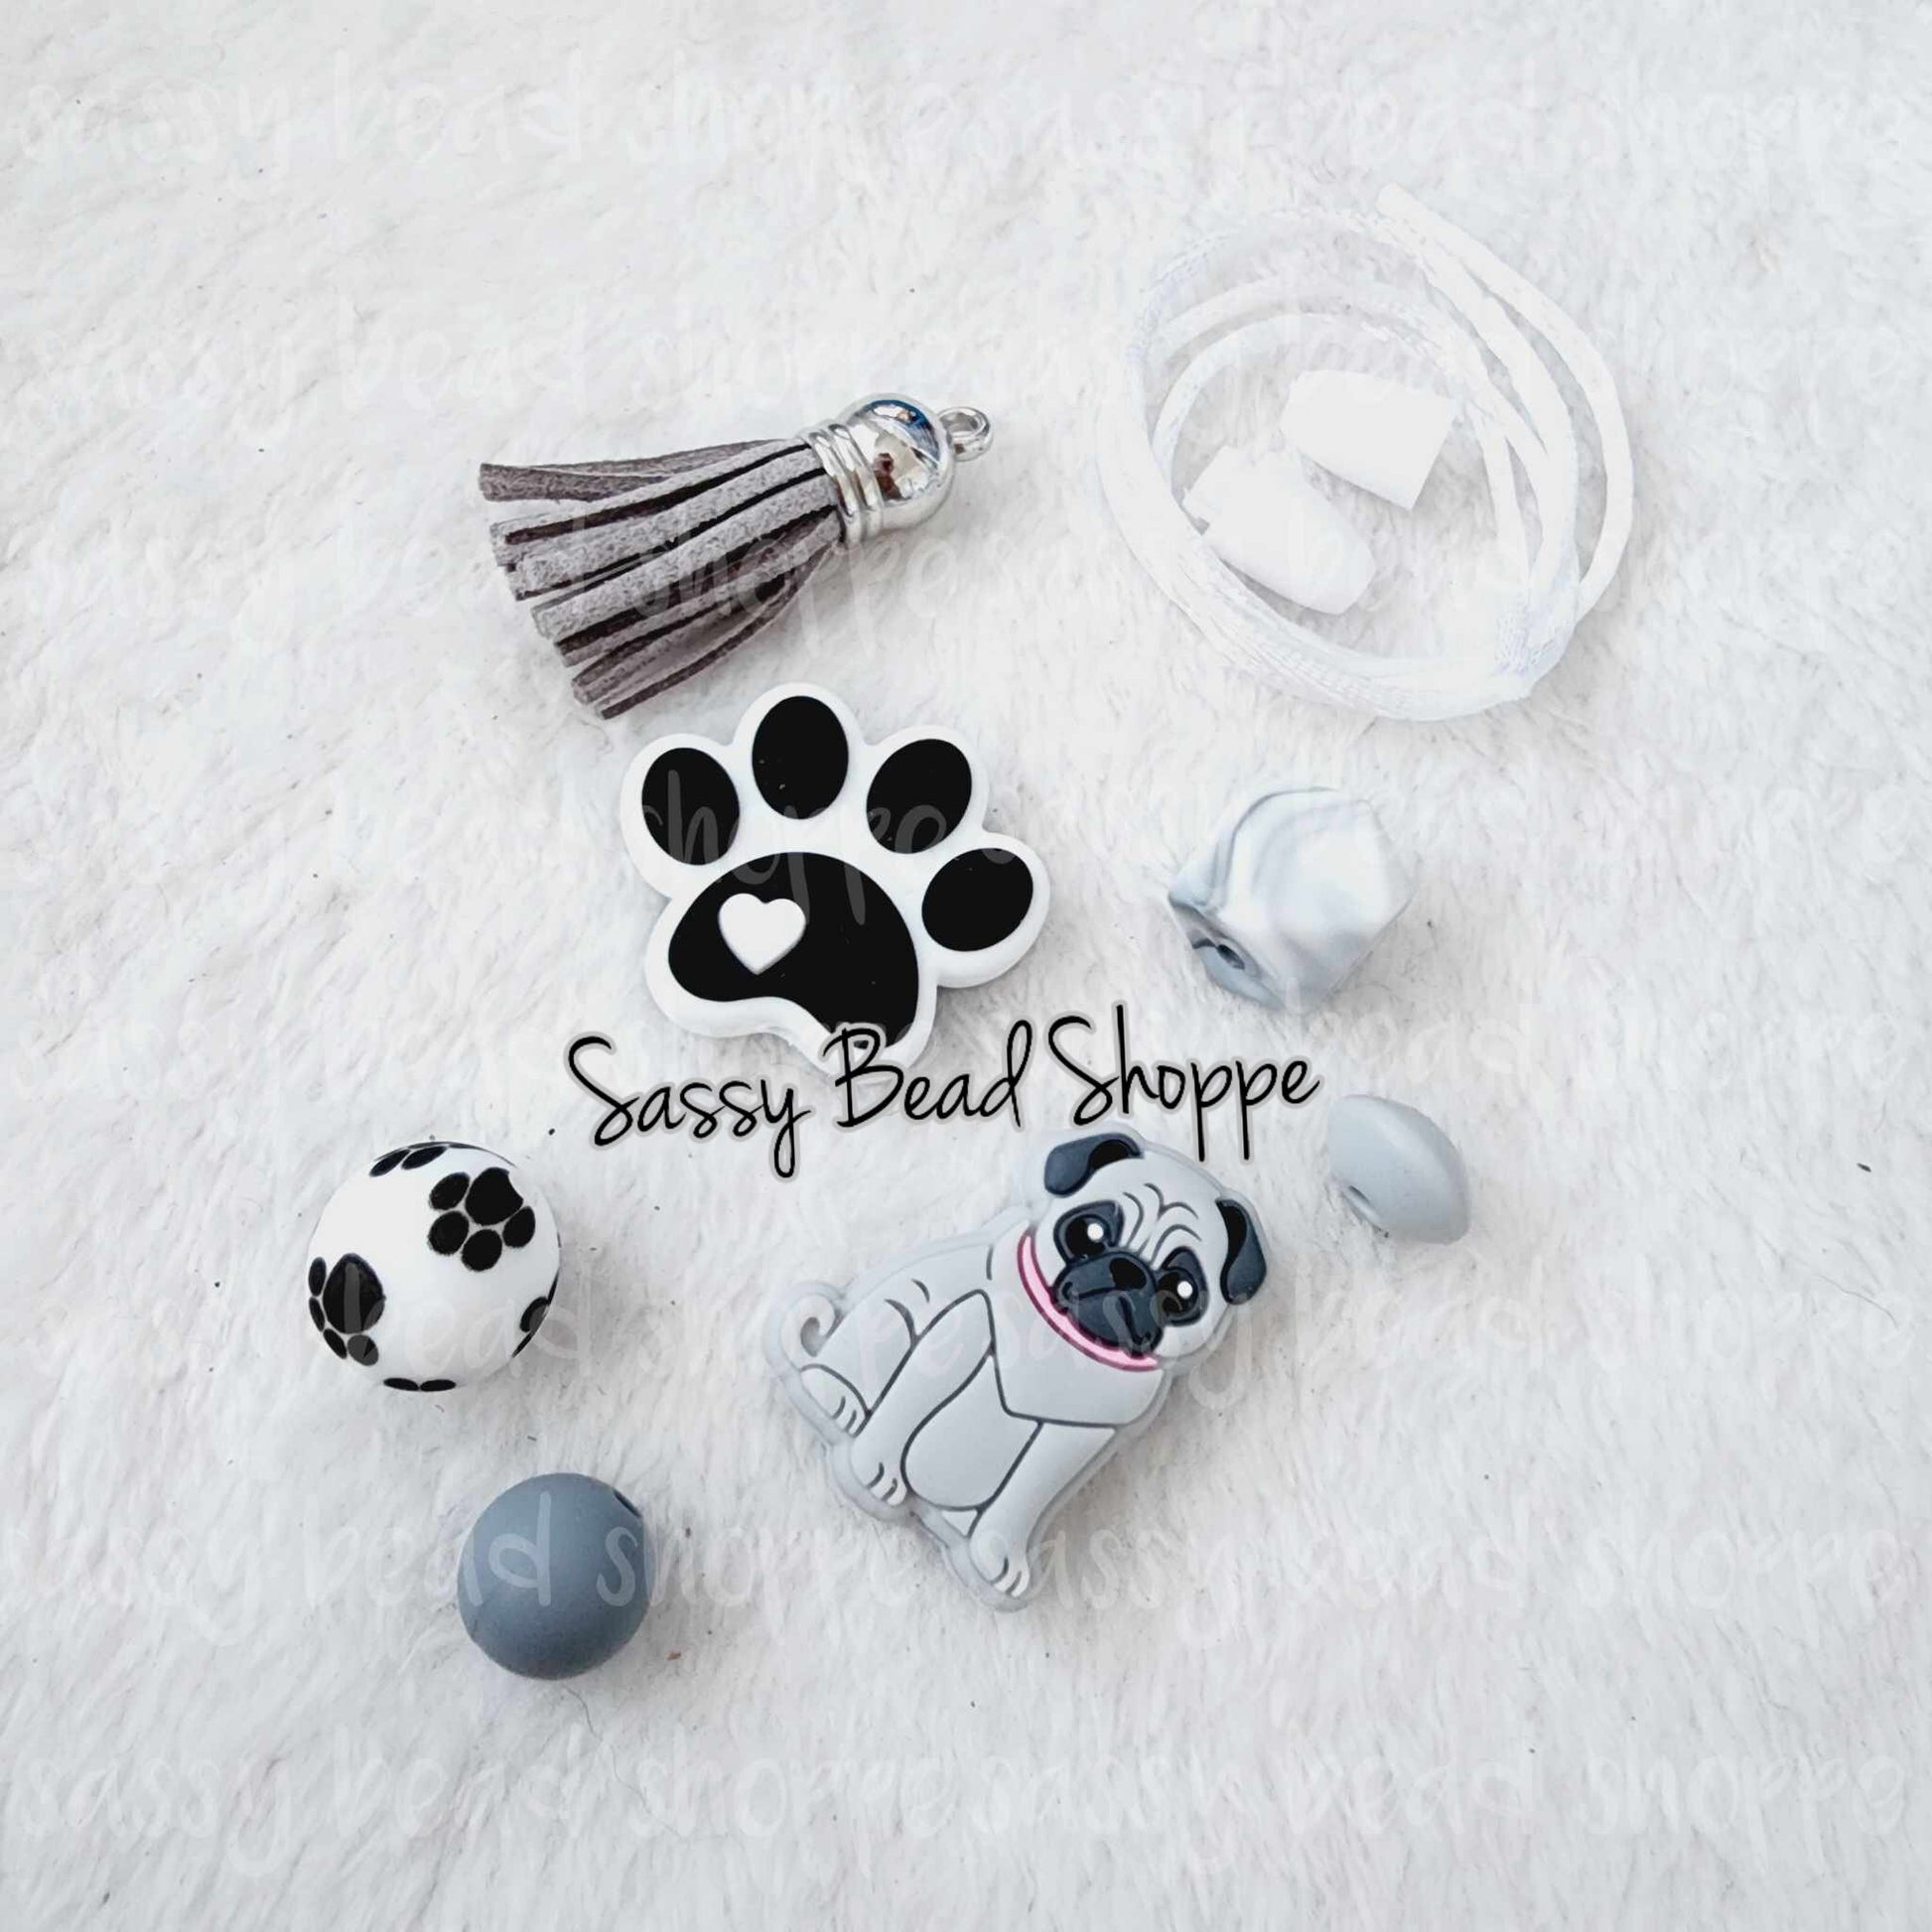 Sassy Bead Shoppe Pug Paw Car Charm What you will receive in your kit